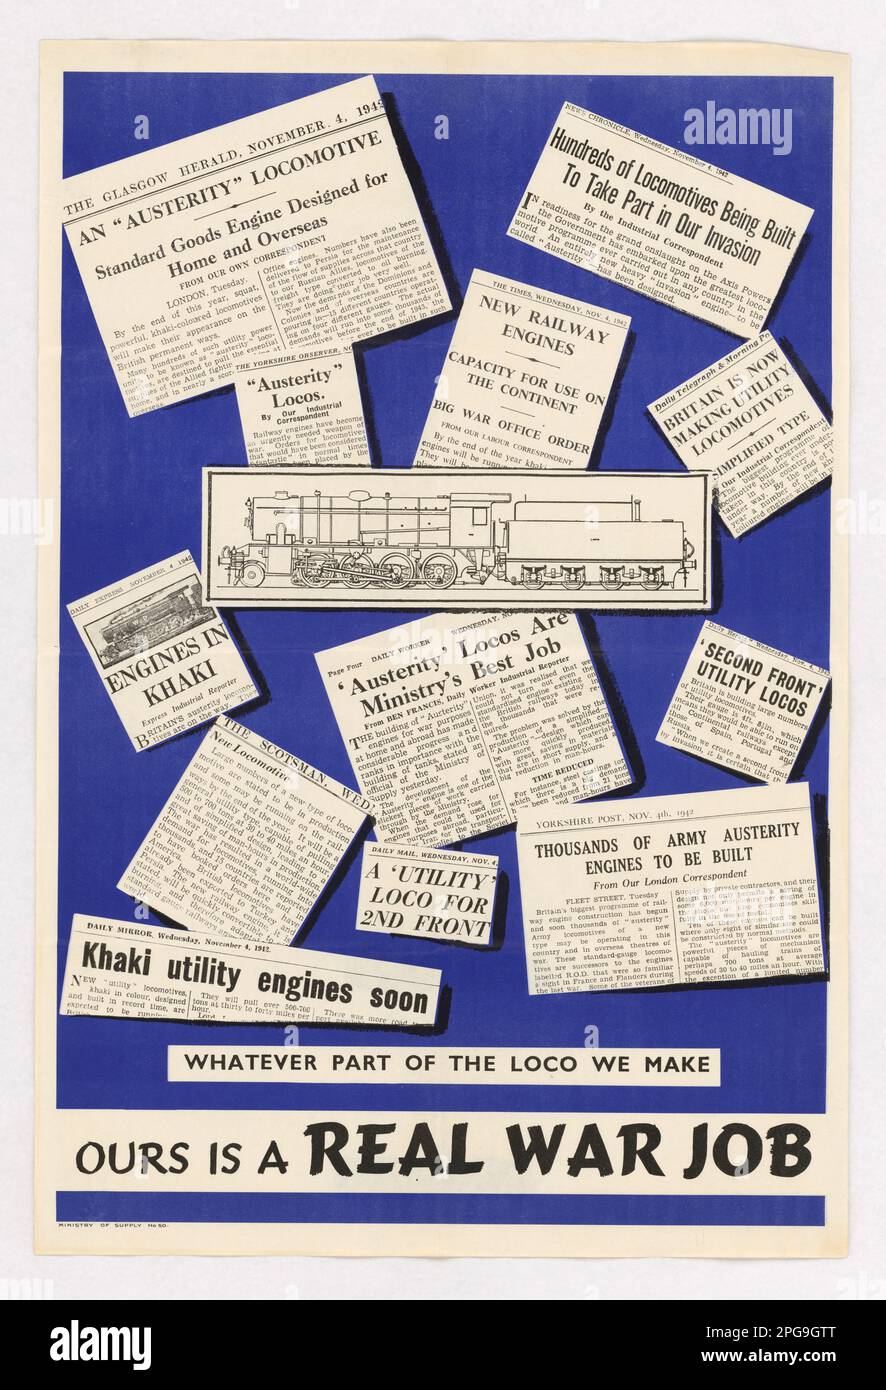 Whatever Part of the Loco We Make - Ours is a Real War Job. Contributor: Ministry of Supply. 1942 - 1945.  Office for Emergency Management. Office of War Information. Domestic Operations Branch. Bureau of Special Services. 3/9/1943-9/15/1945. World War II Foreign Posters Stock Photo